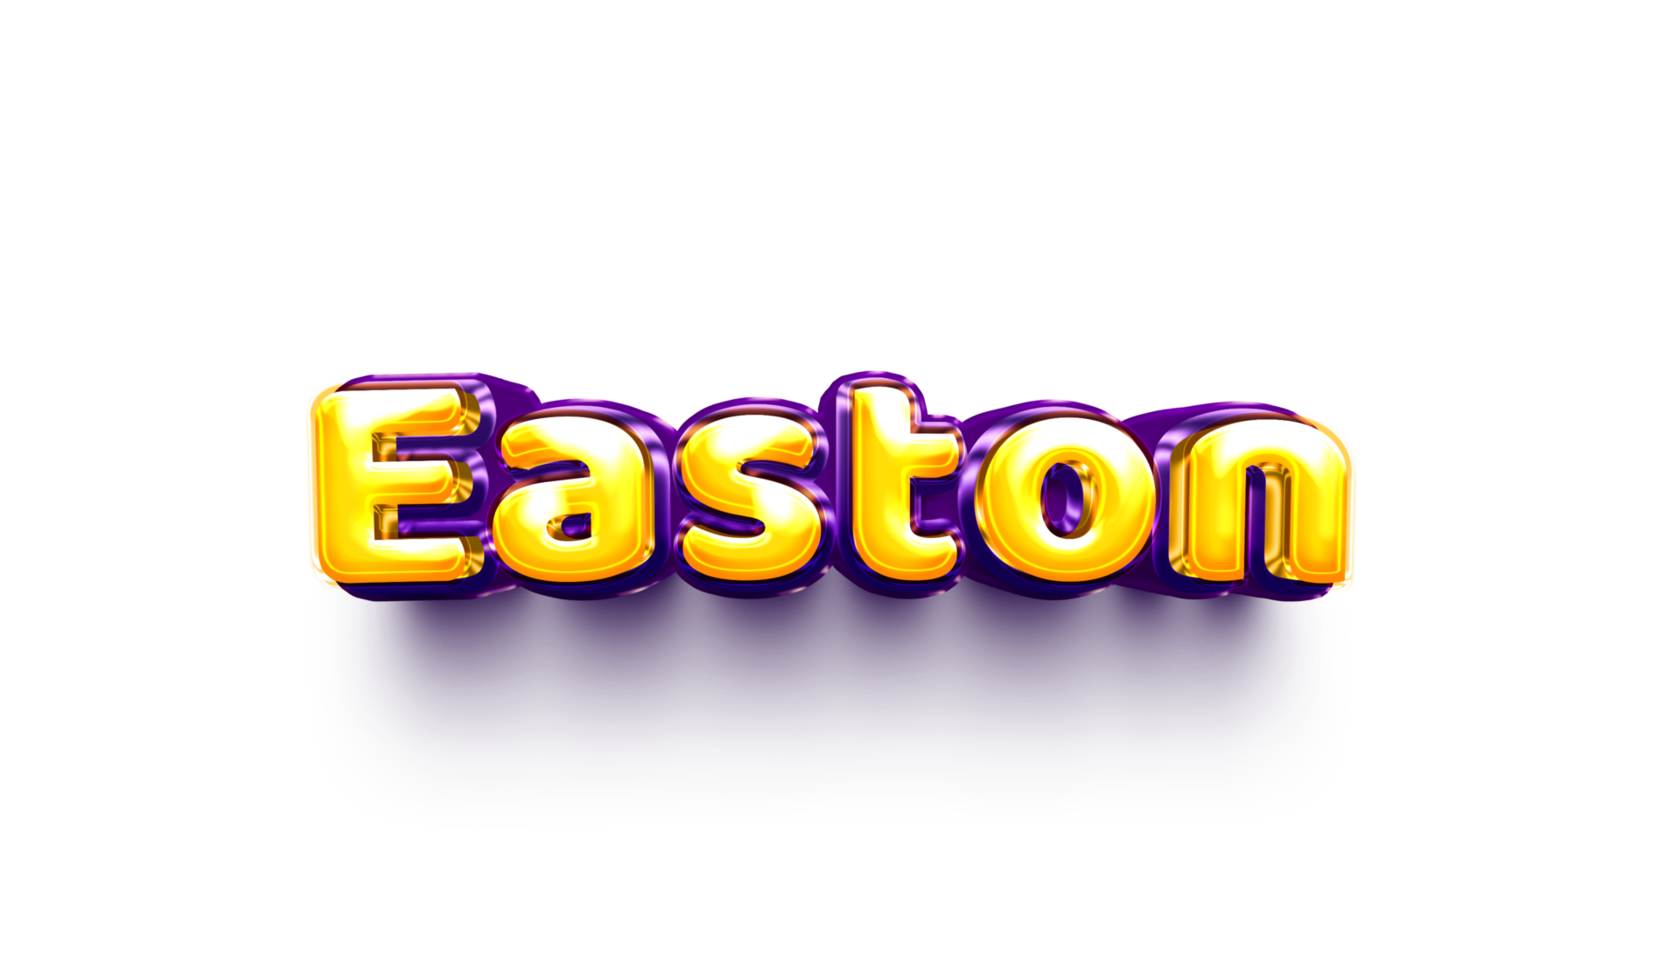 names of boy English helium balloon shiny celebration sticker 3d inflated easton png